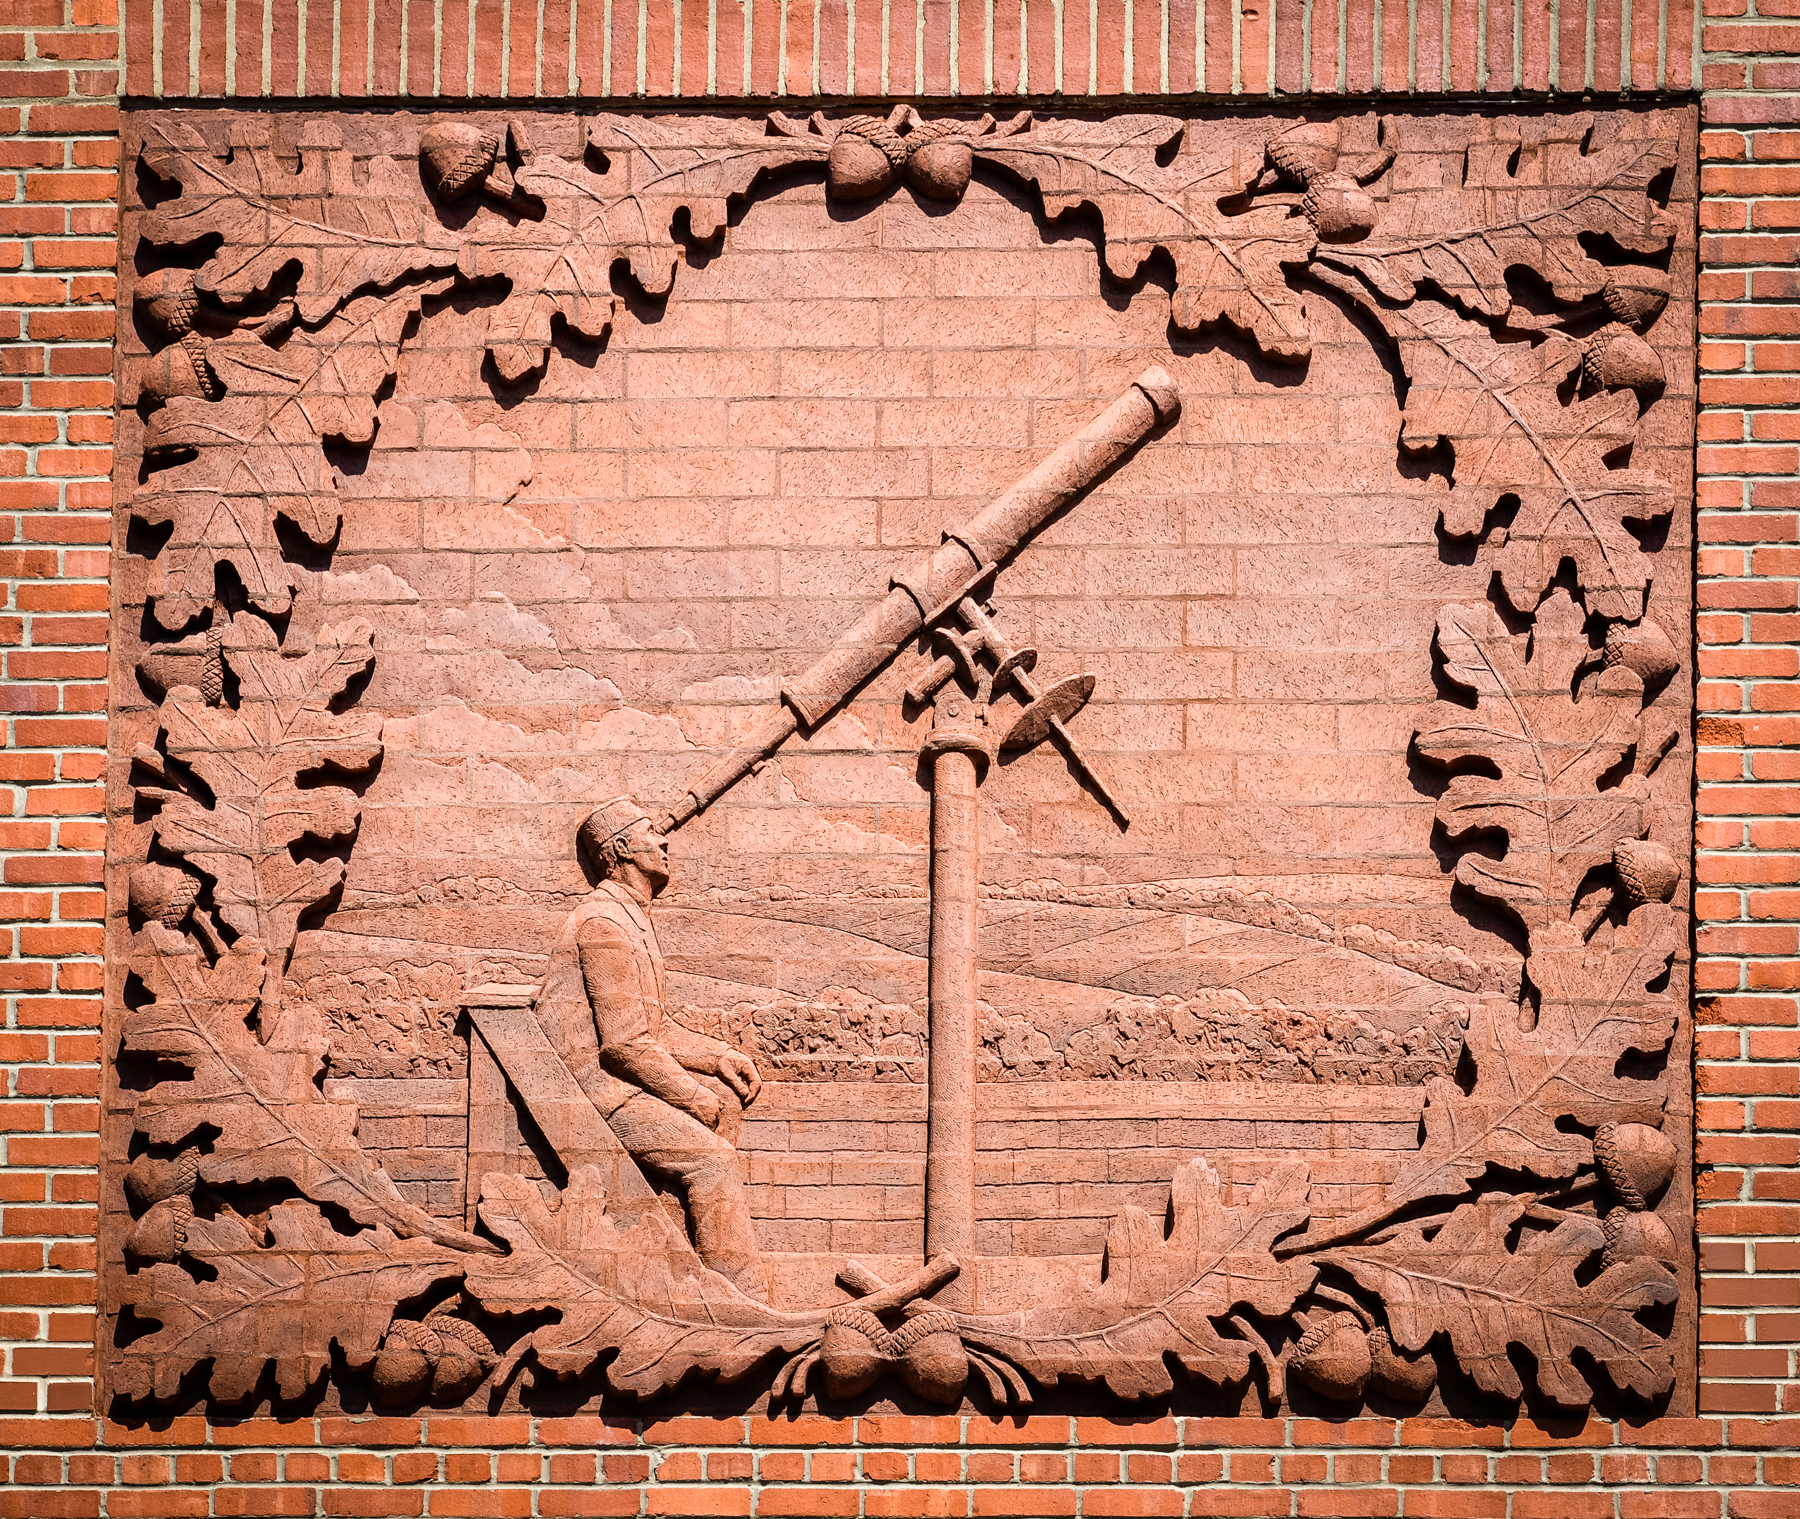 Close up view of the brick relief on the theatre showing W.H. Hoyt, long time faculty member and namesake of Hoyt Science Hall searching the skies with a telescope.